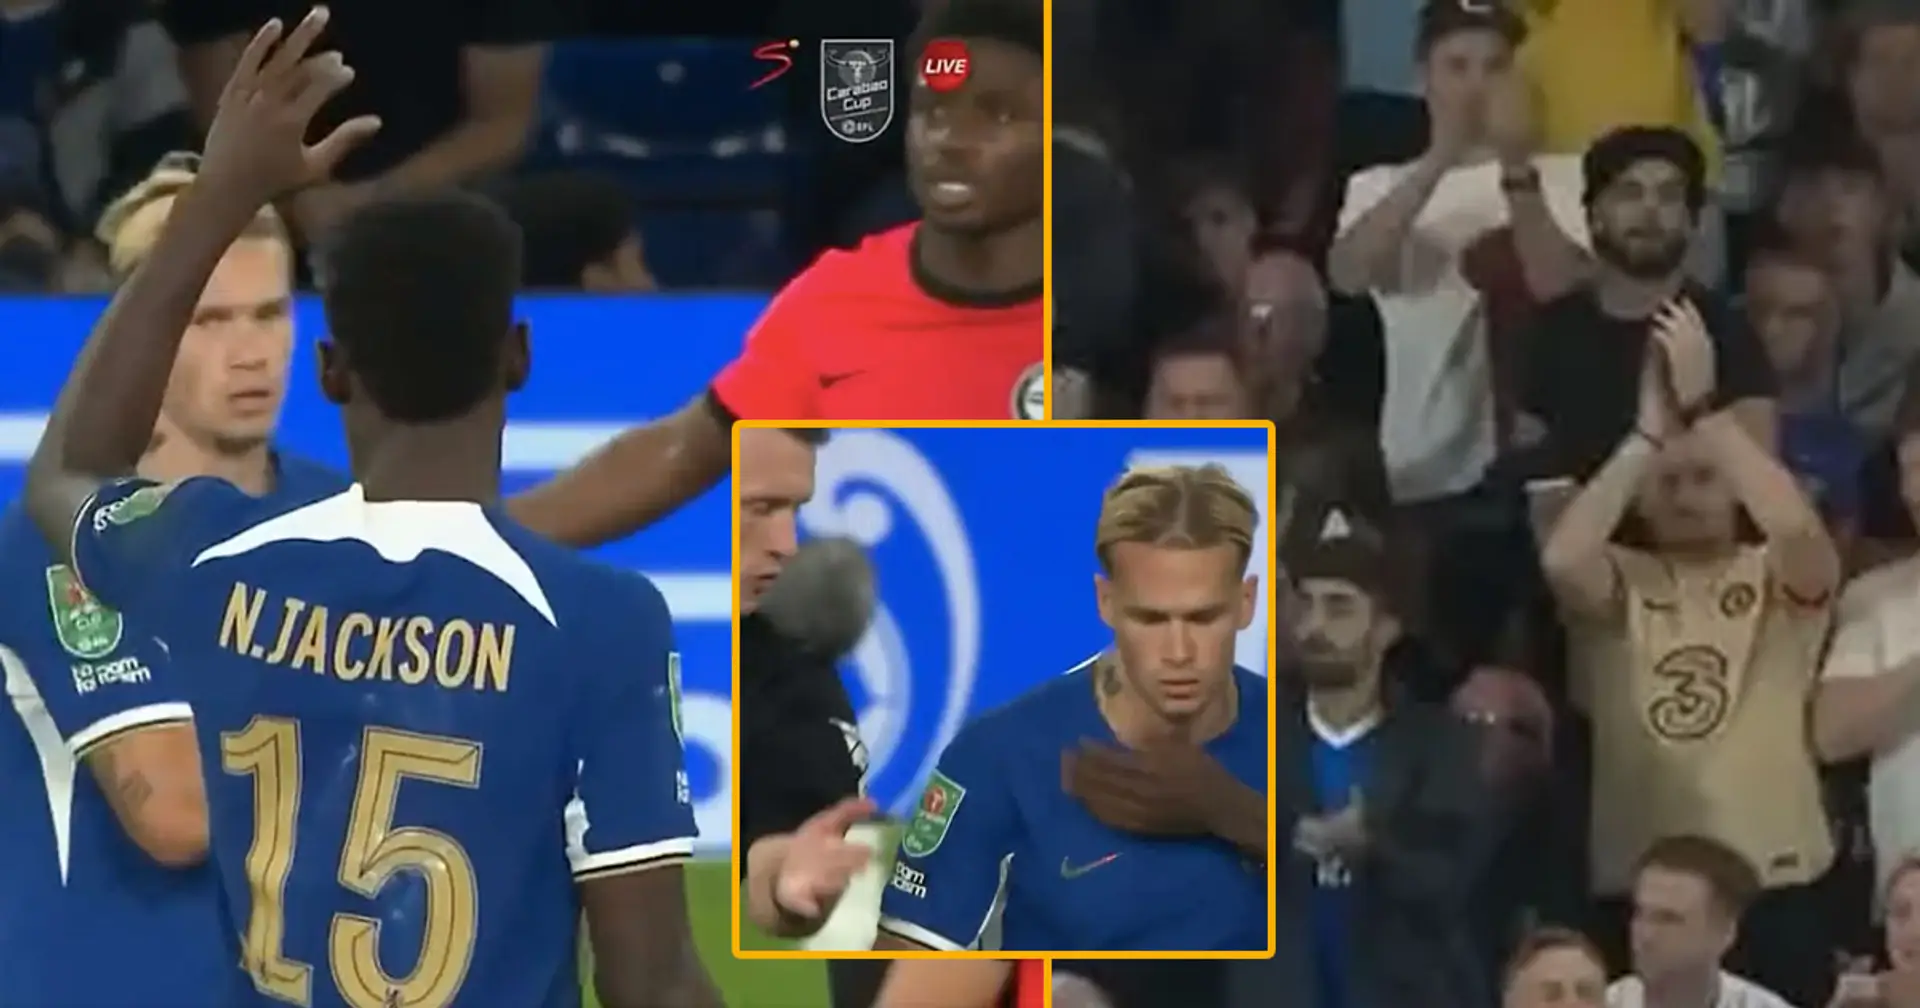 Ref breaks rules for Mudryk and overrules Brighton moans - spotted